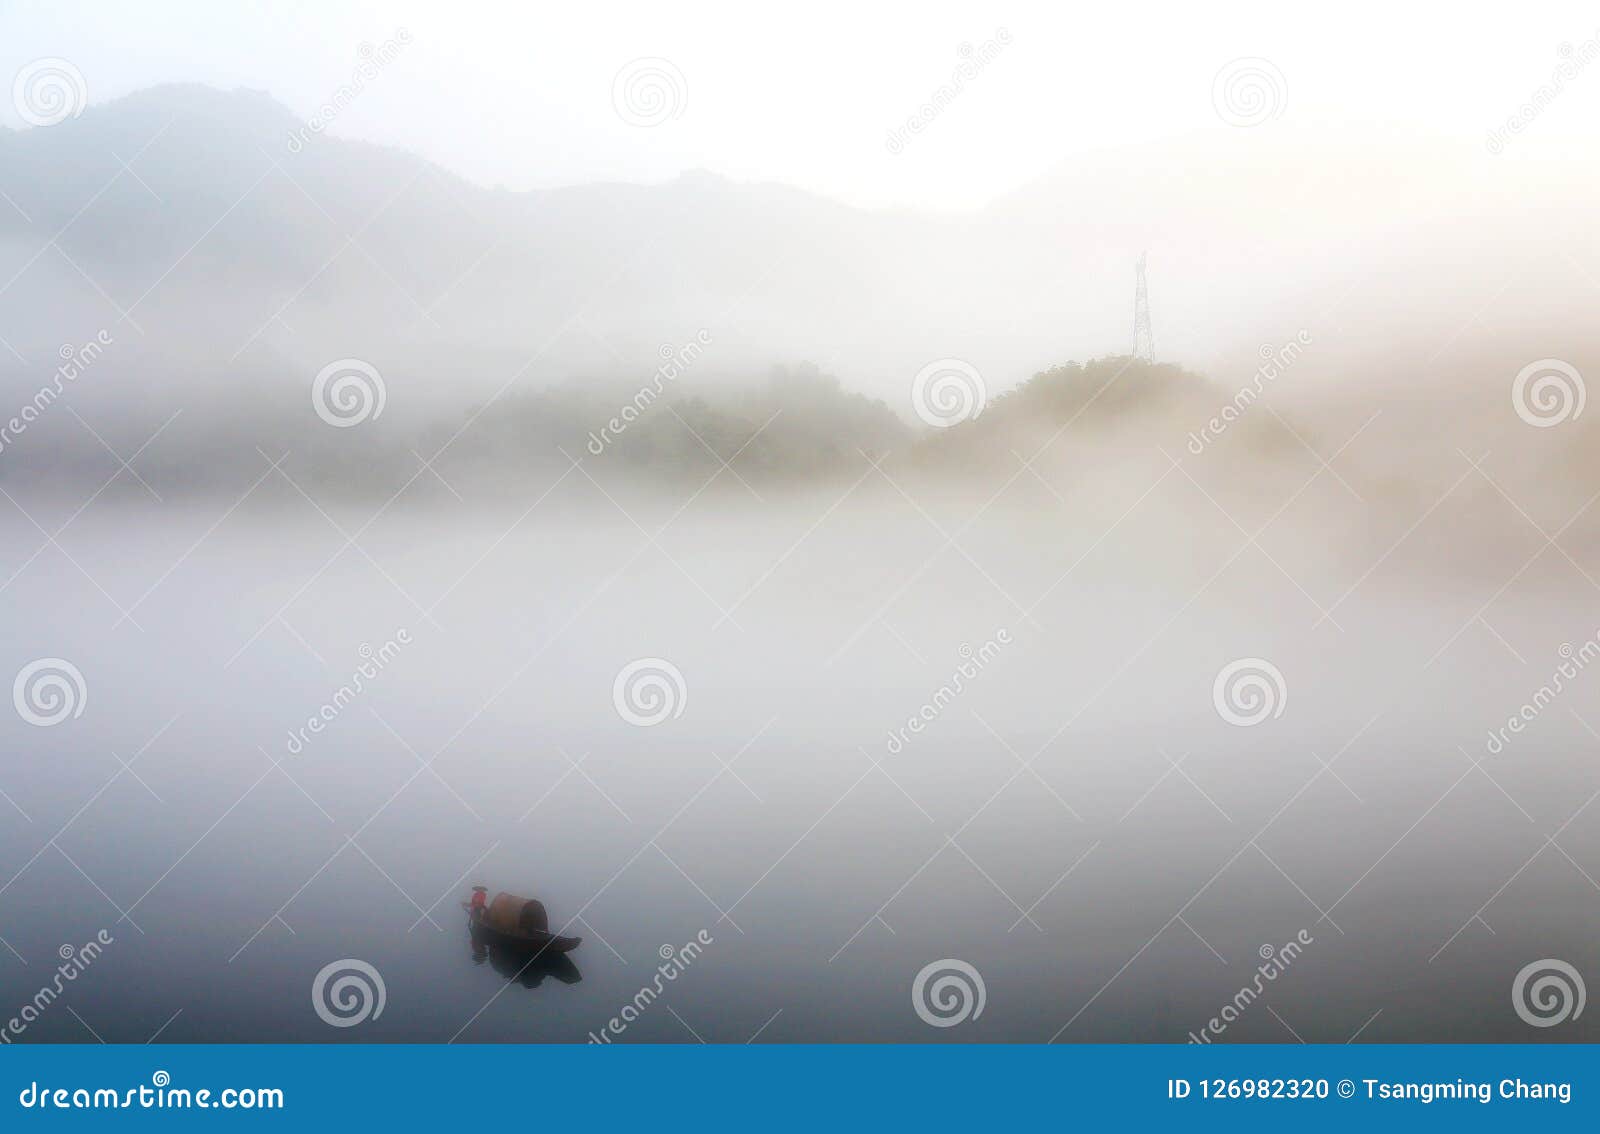 the foggy fairyland on dongjiang river